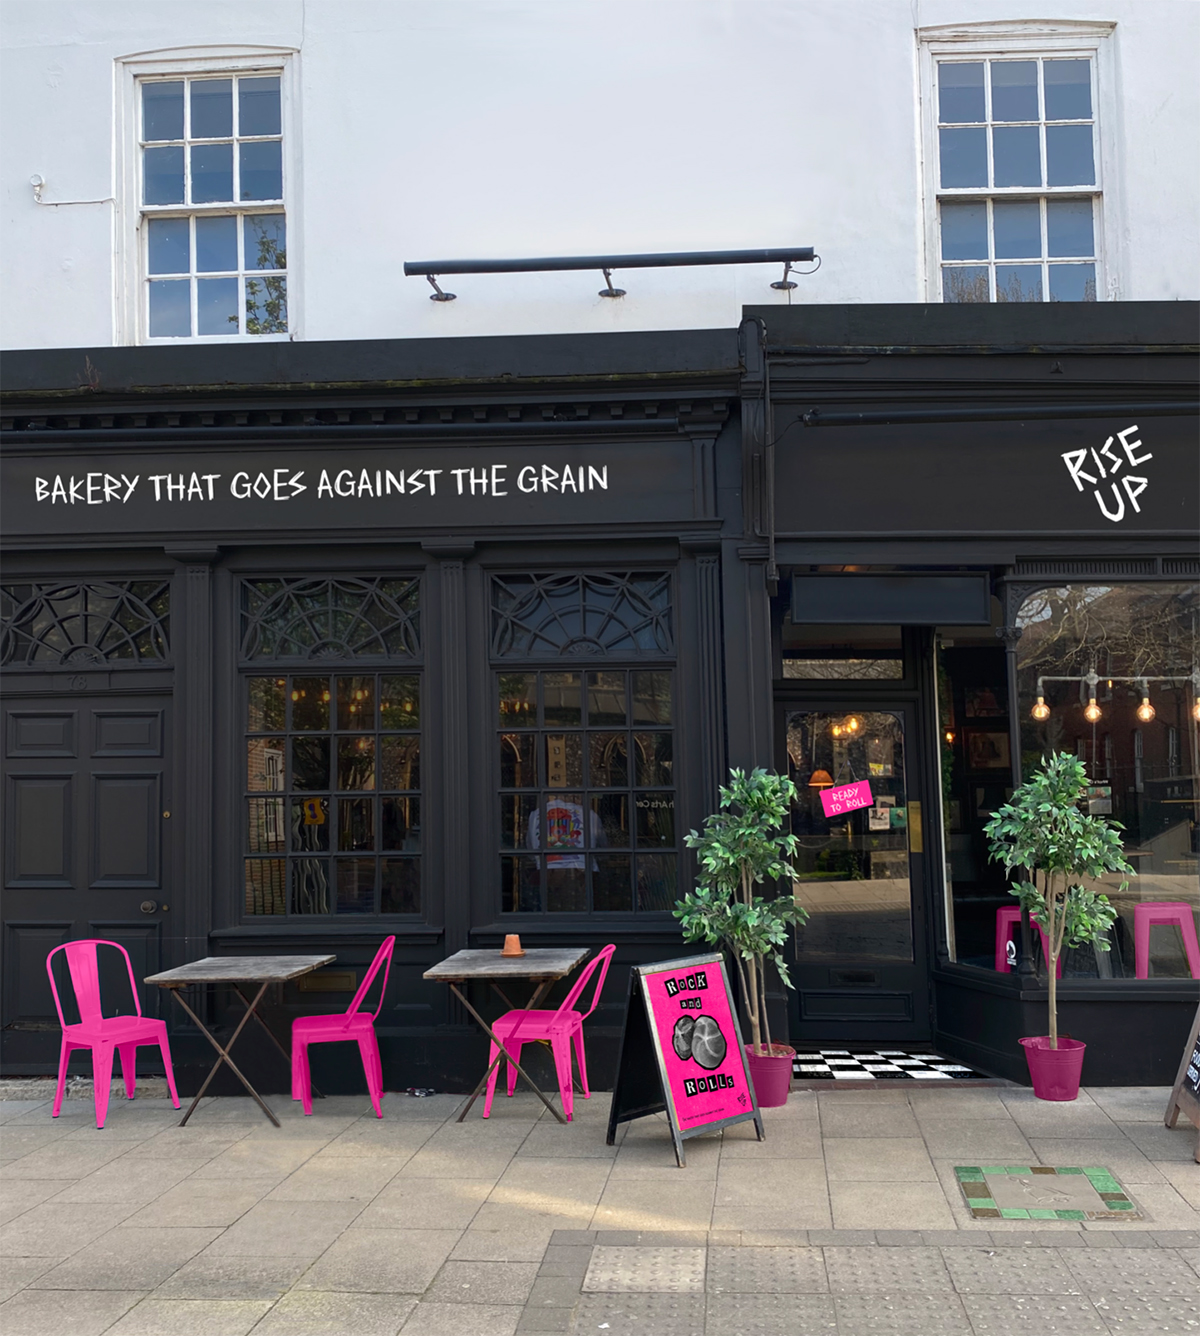 Rise up bakery exterior, painted black with white text and hot pink chairs outside.